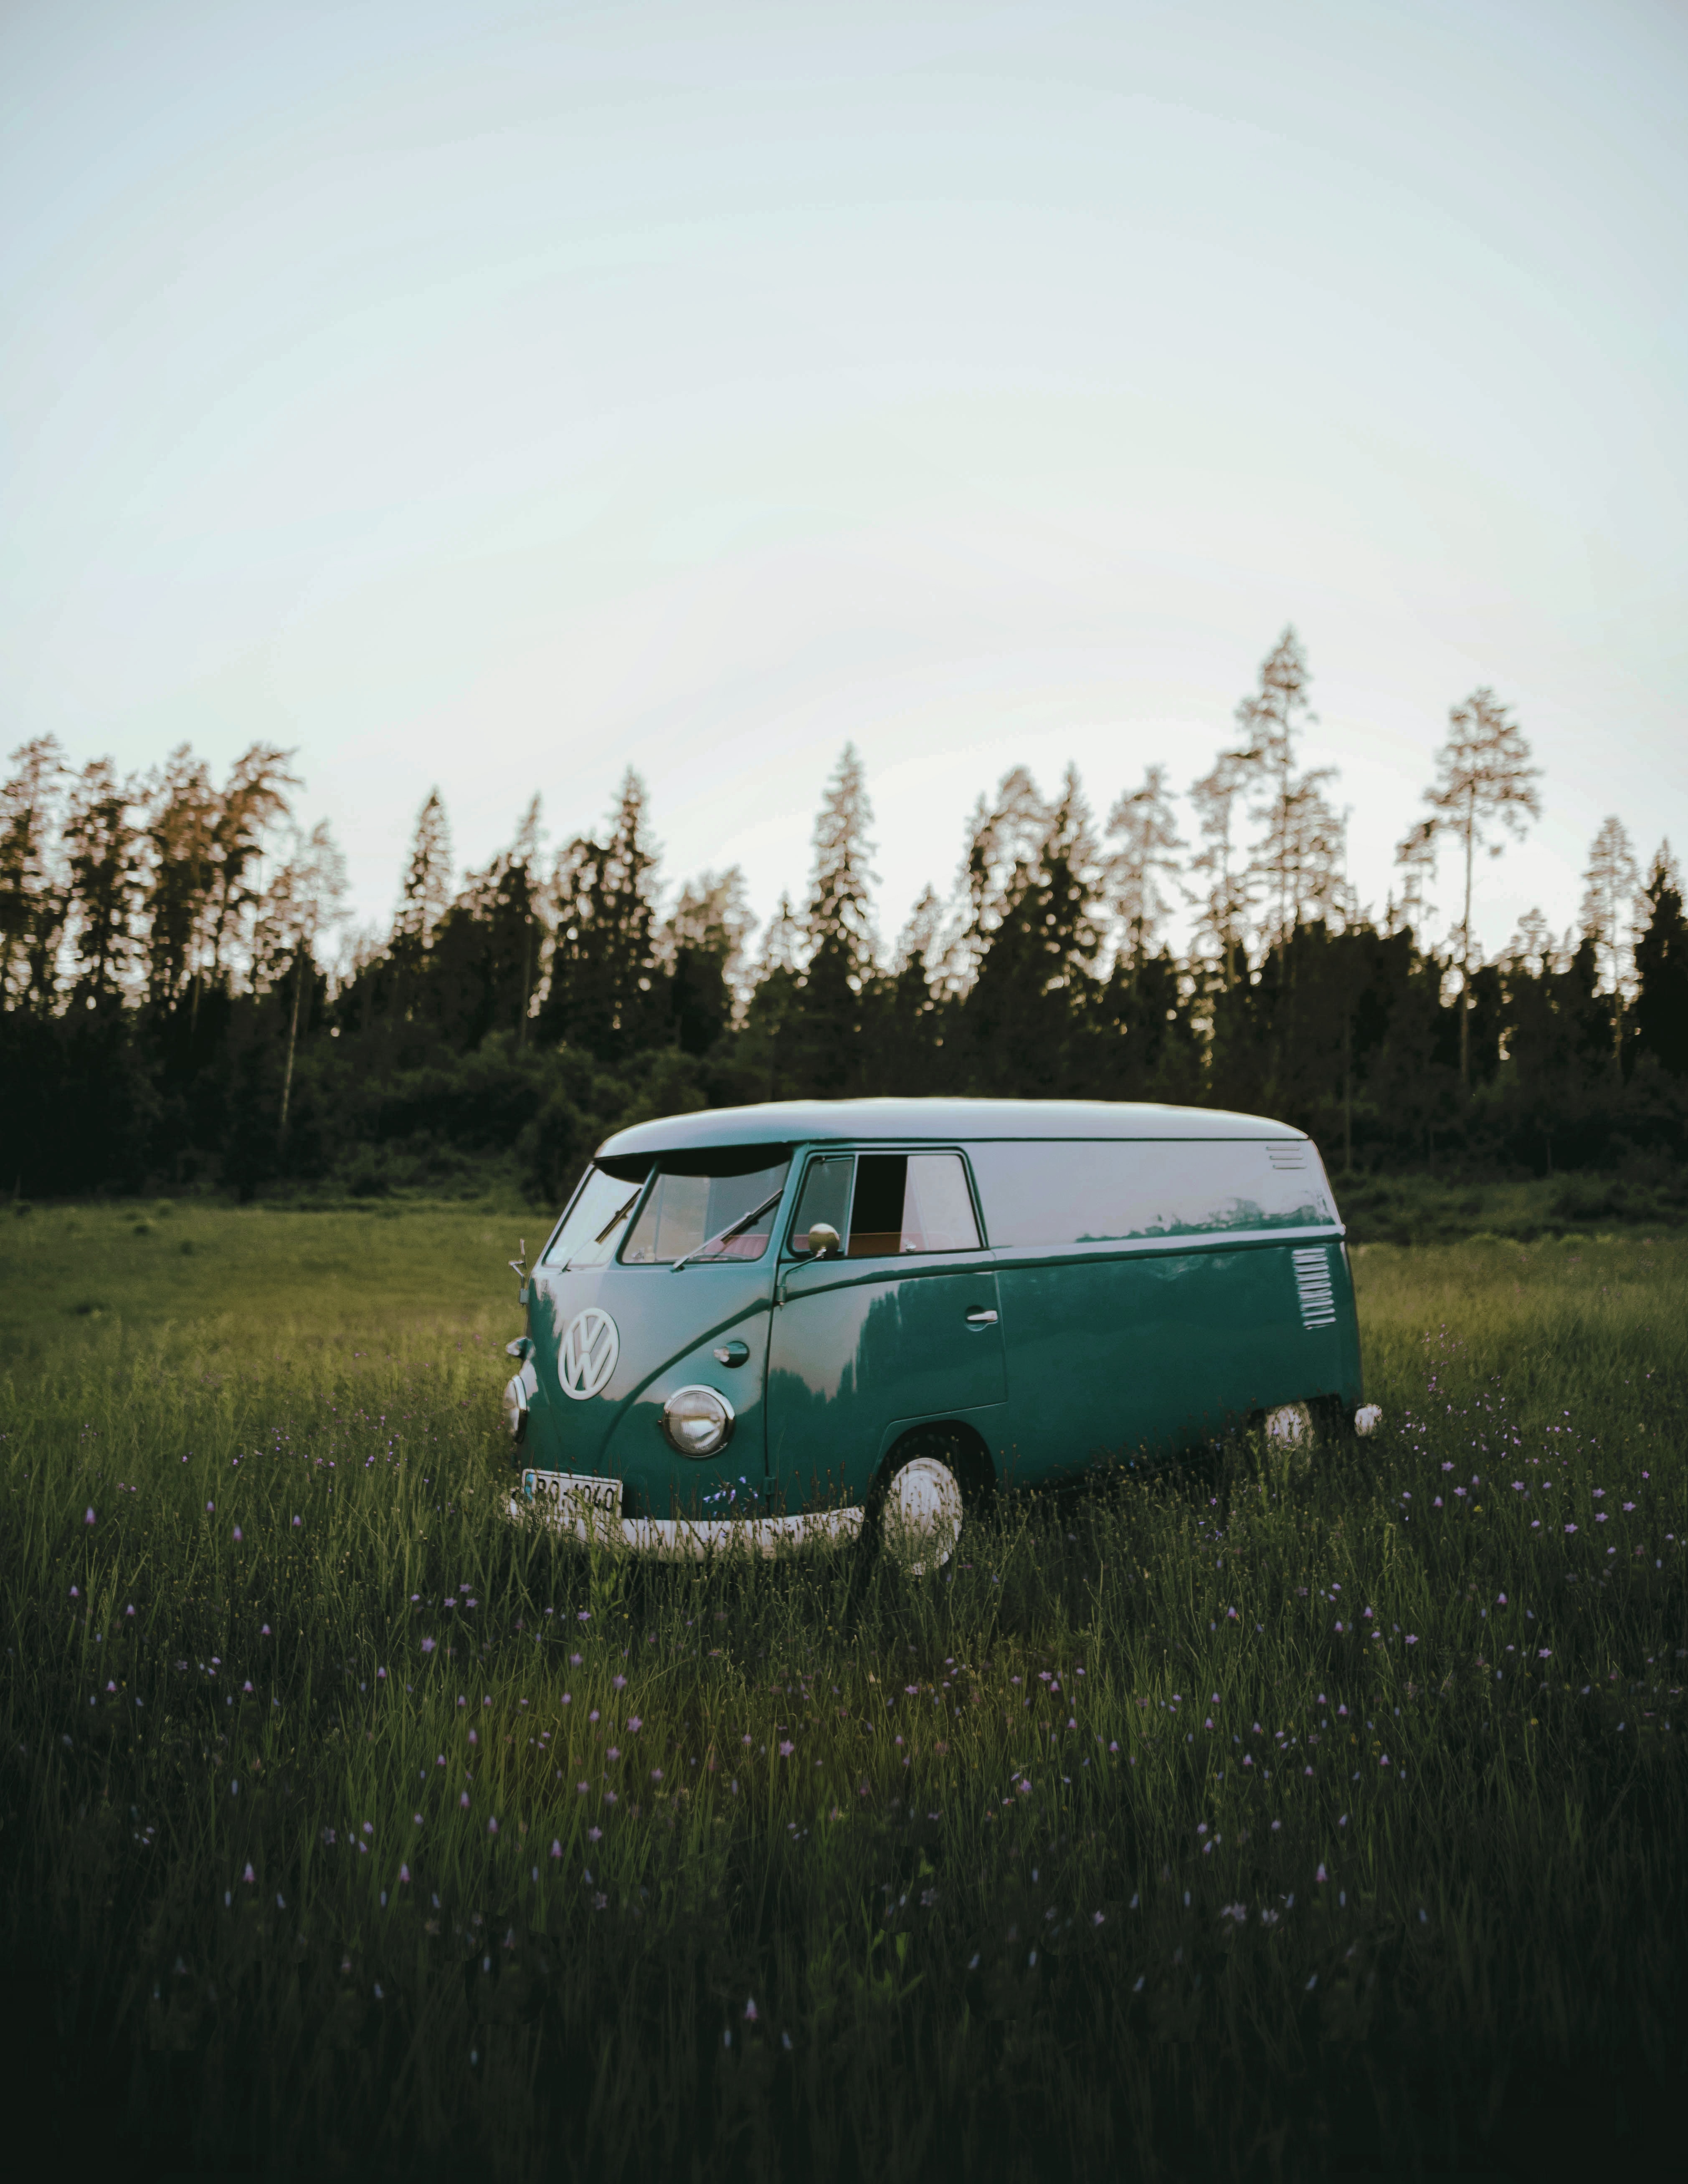 116375 download wallpaper grass, volkswagen, cars, car, field, machine, volkswagen t1 screensavers and pictures for free